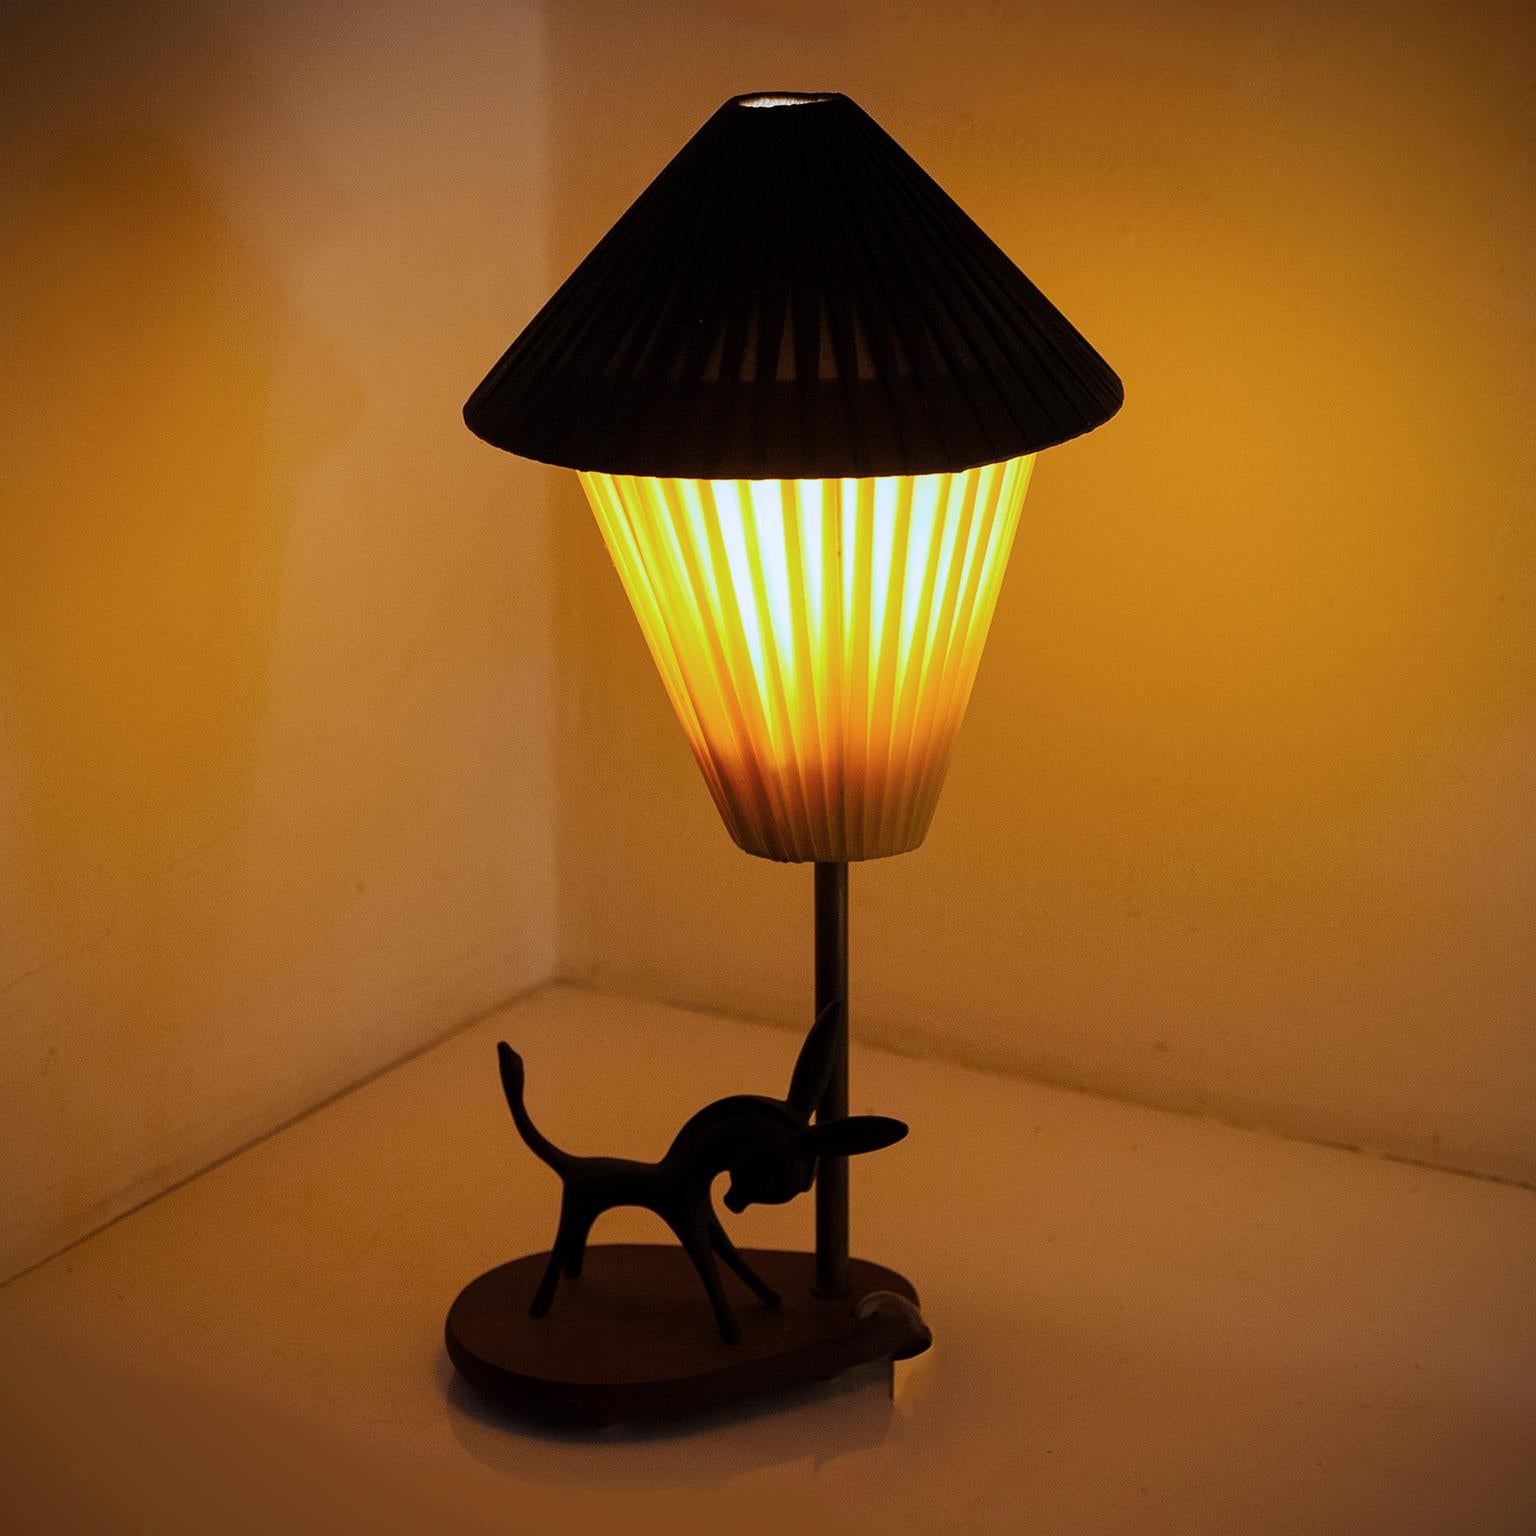 Walter Bosse Donkey Table Lamp, 1950s For Sale 1